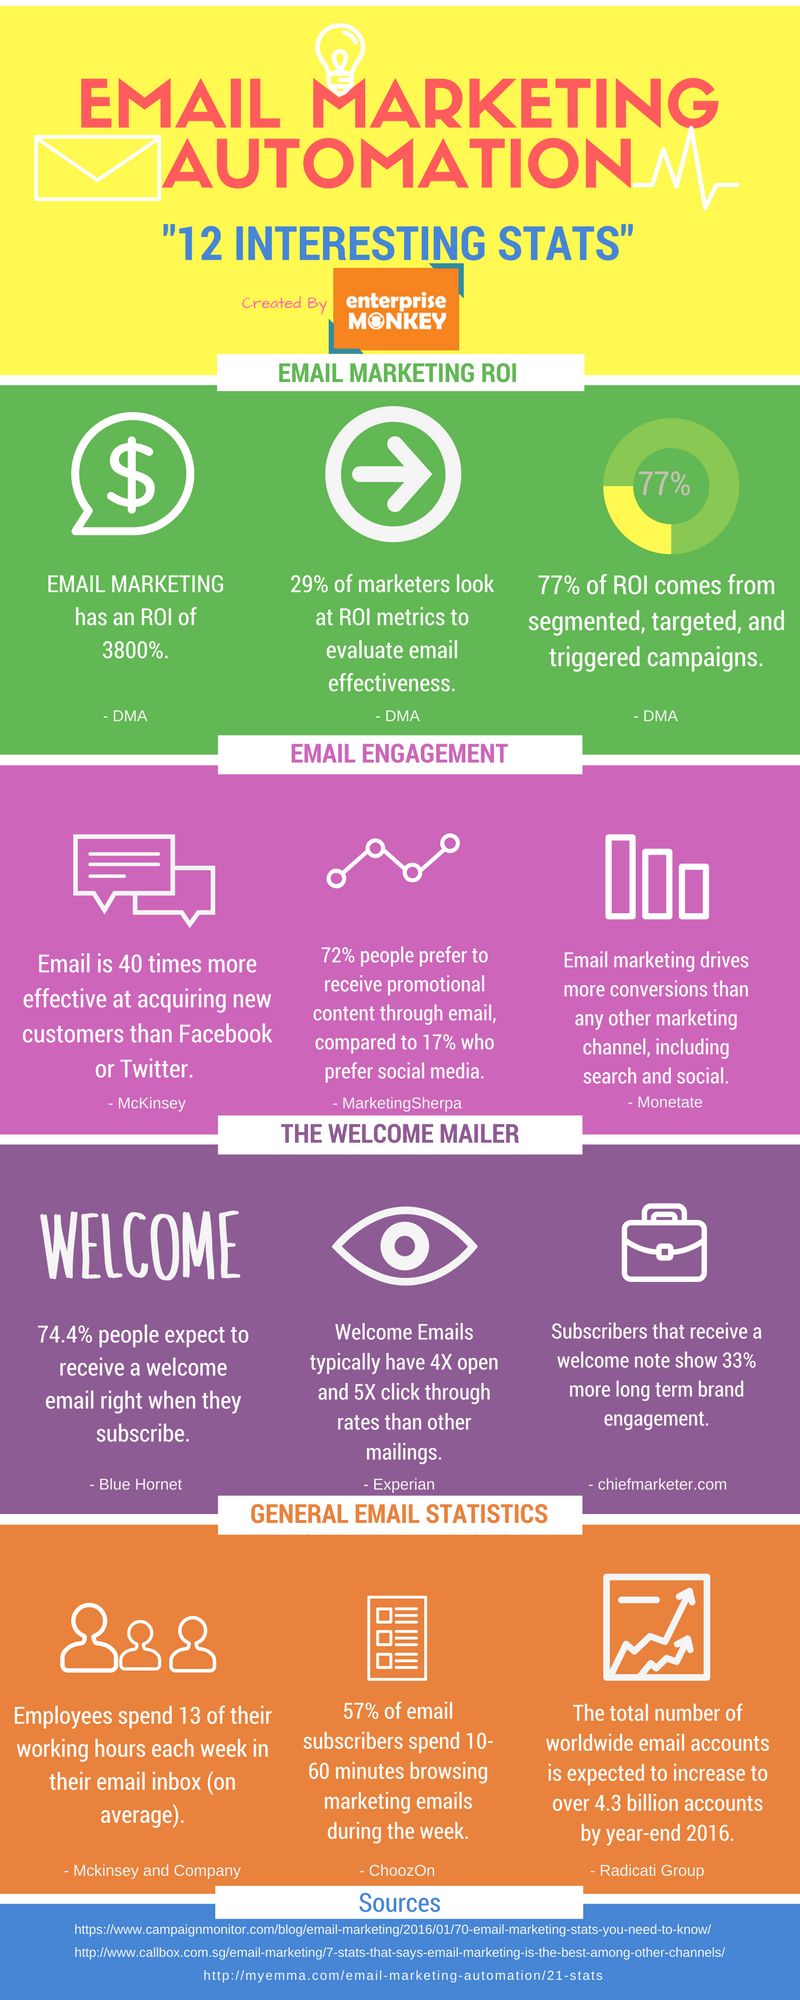 email-marketing-automation